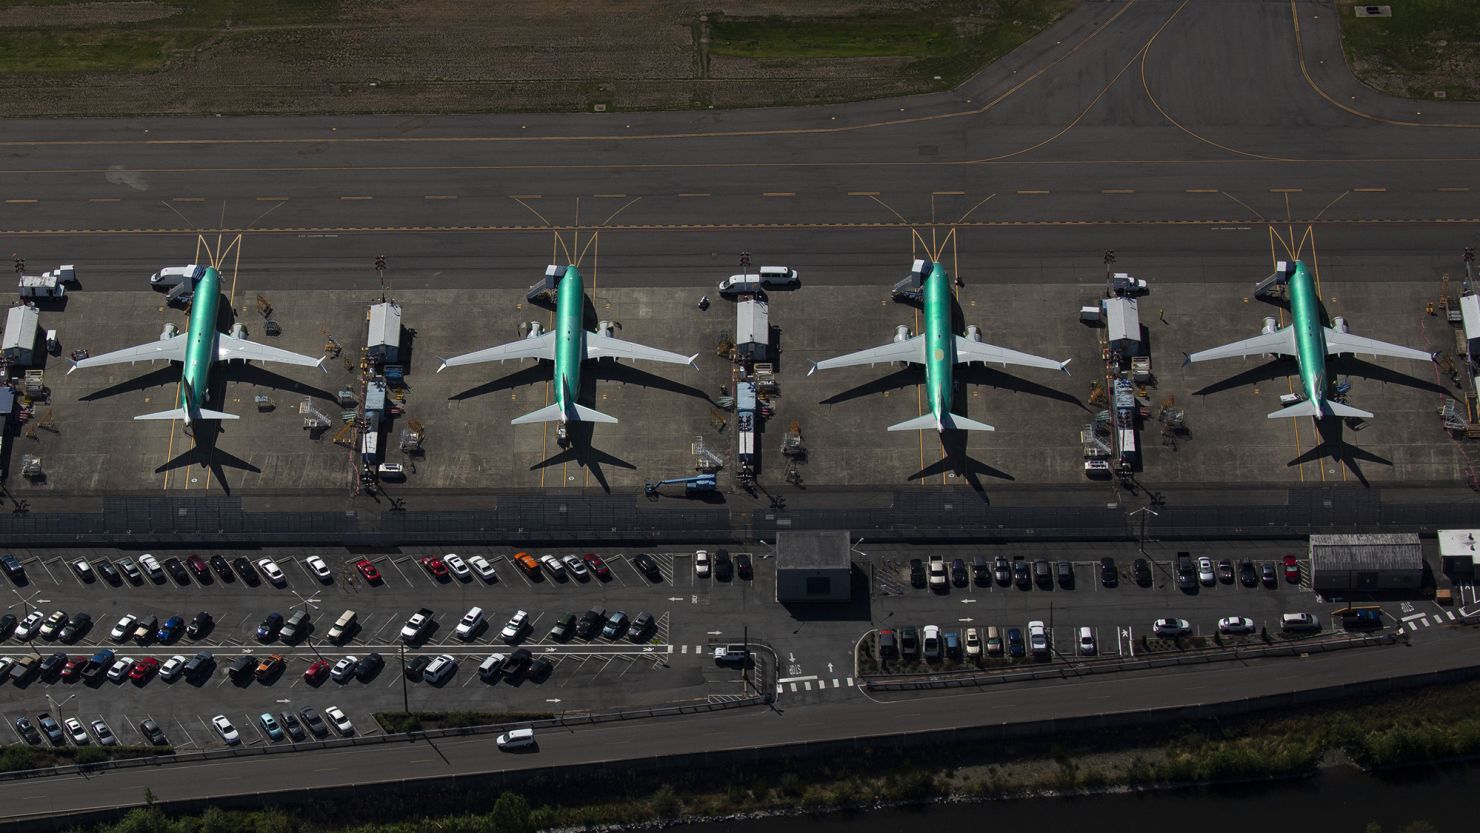 Boeing 737 MAX airplanes are seen parked at a Boeing facility on August 13, 2019 in Renton, Washington.